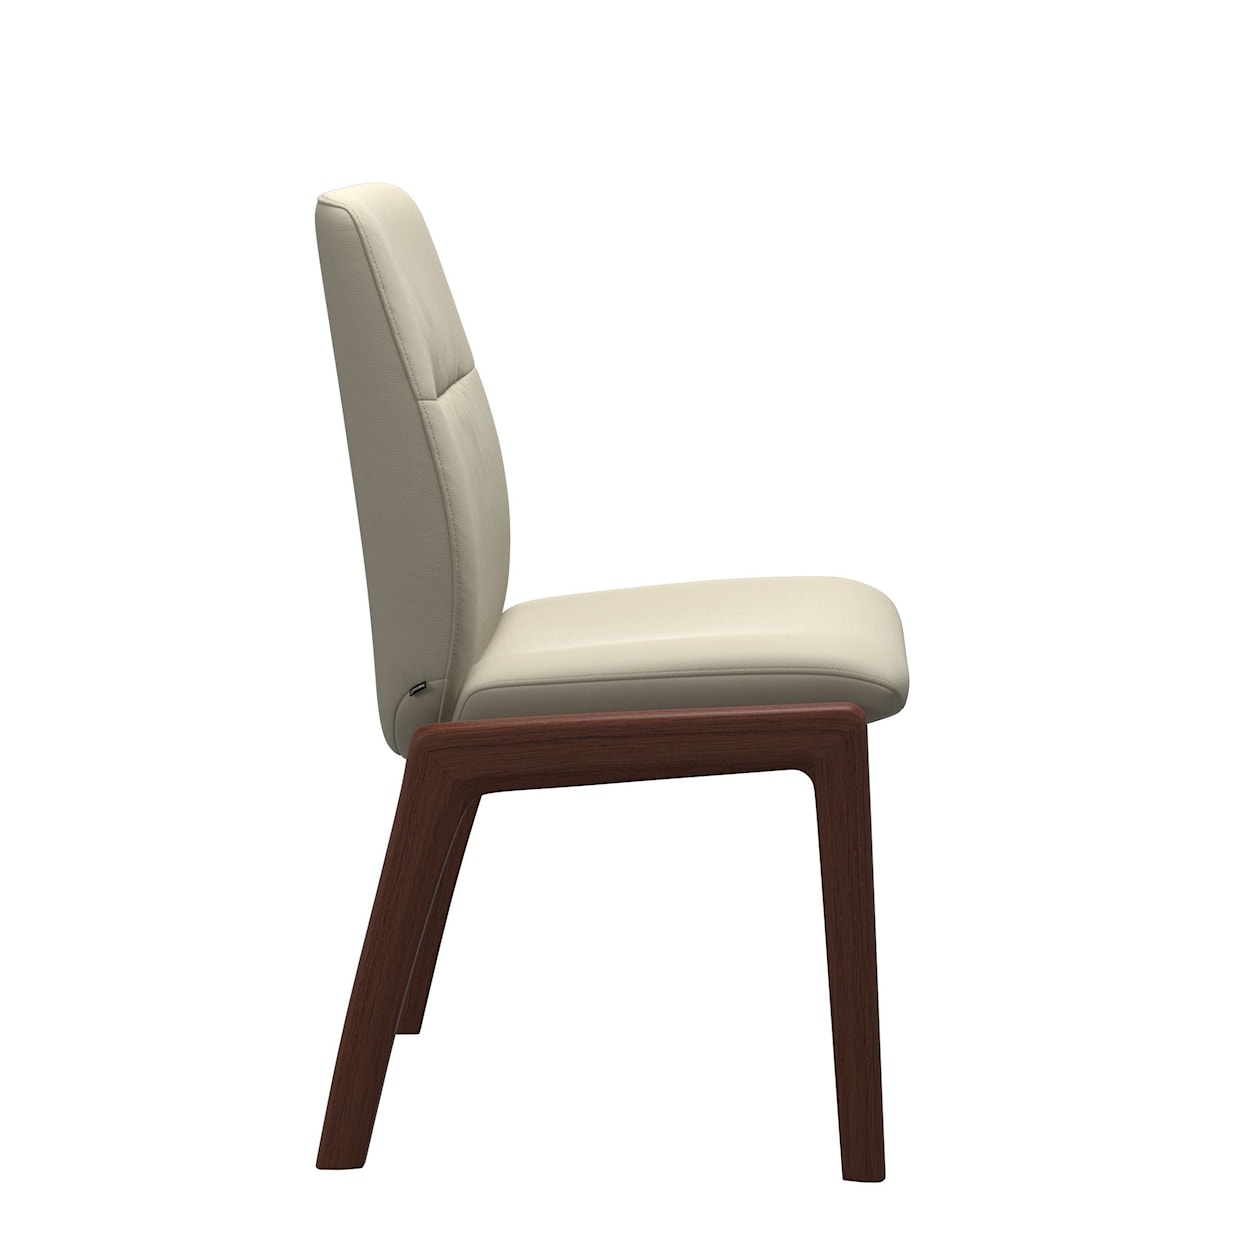 Stressless by Ekornes Stressless Mint Mint Large Low-Back Dining Chair D100